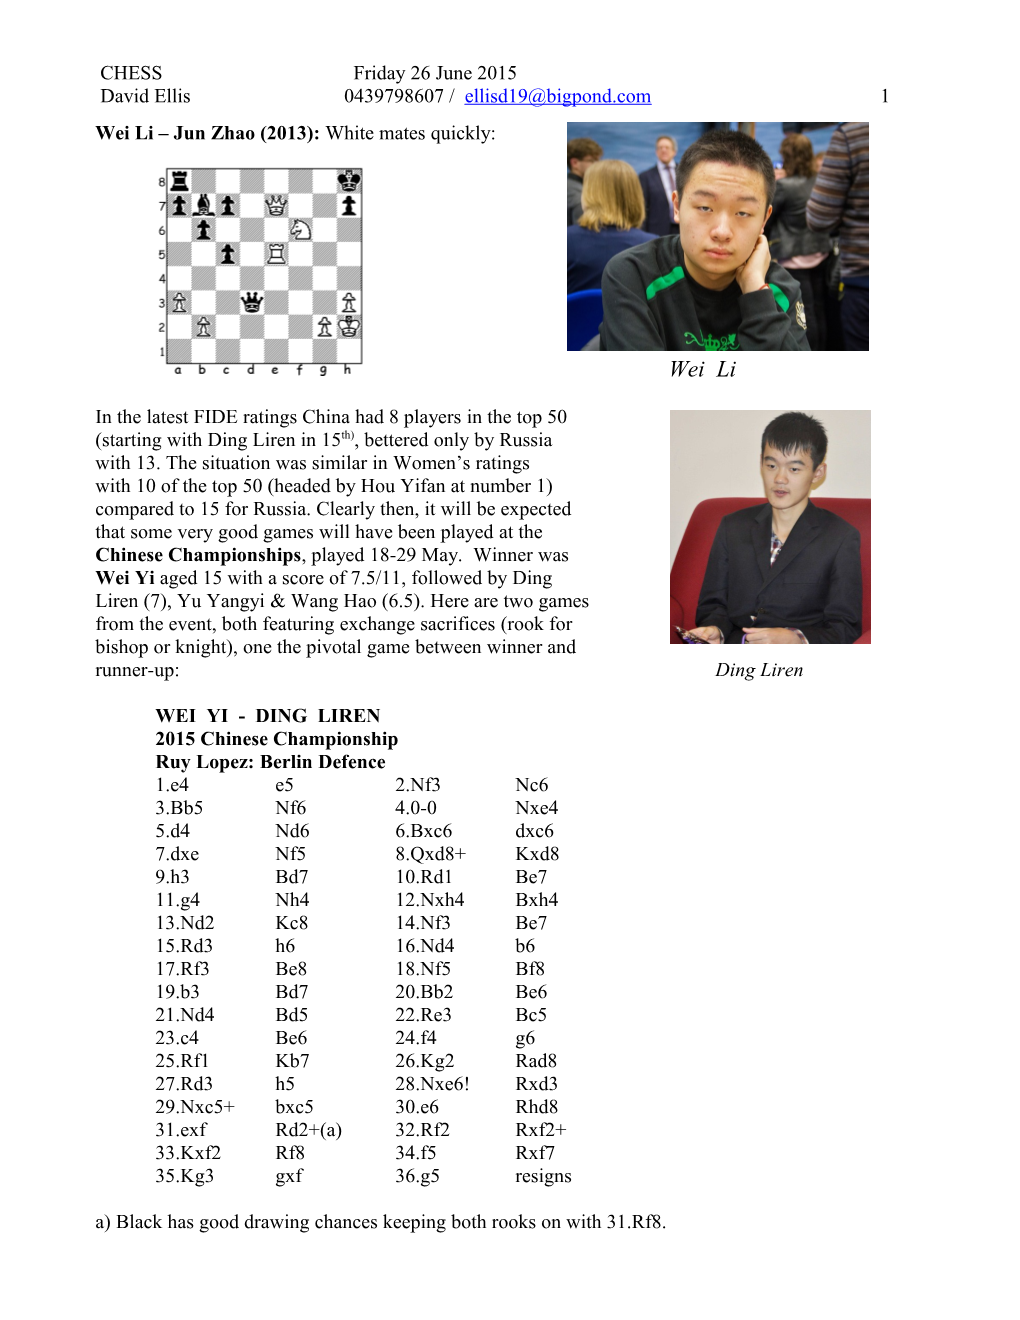 Looking Through Various English-Speaking Chess Web Sites, I Am Always on the Look-Out For s1